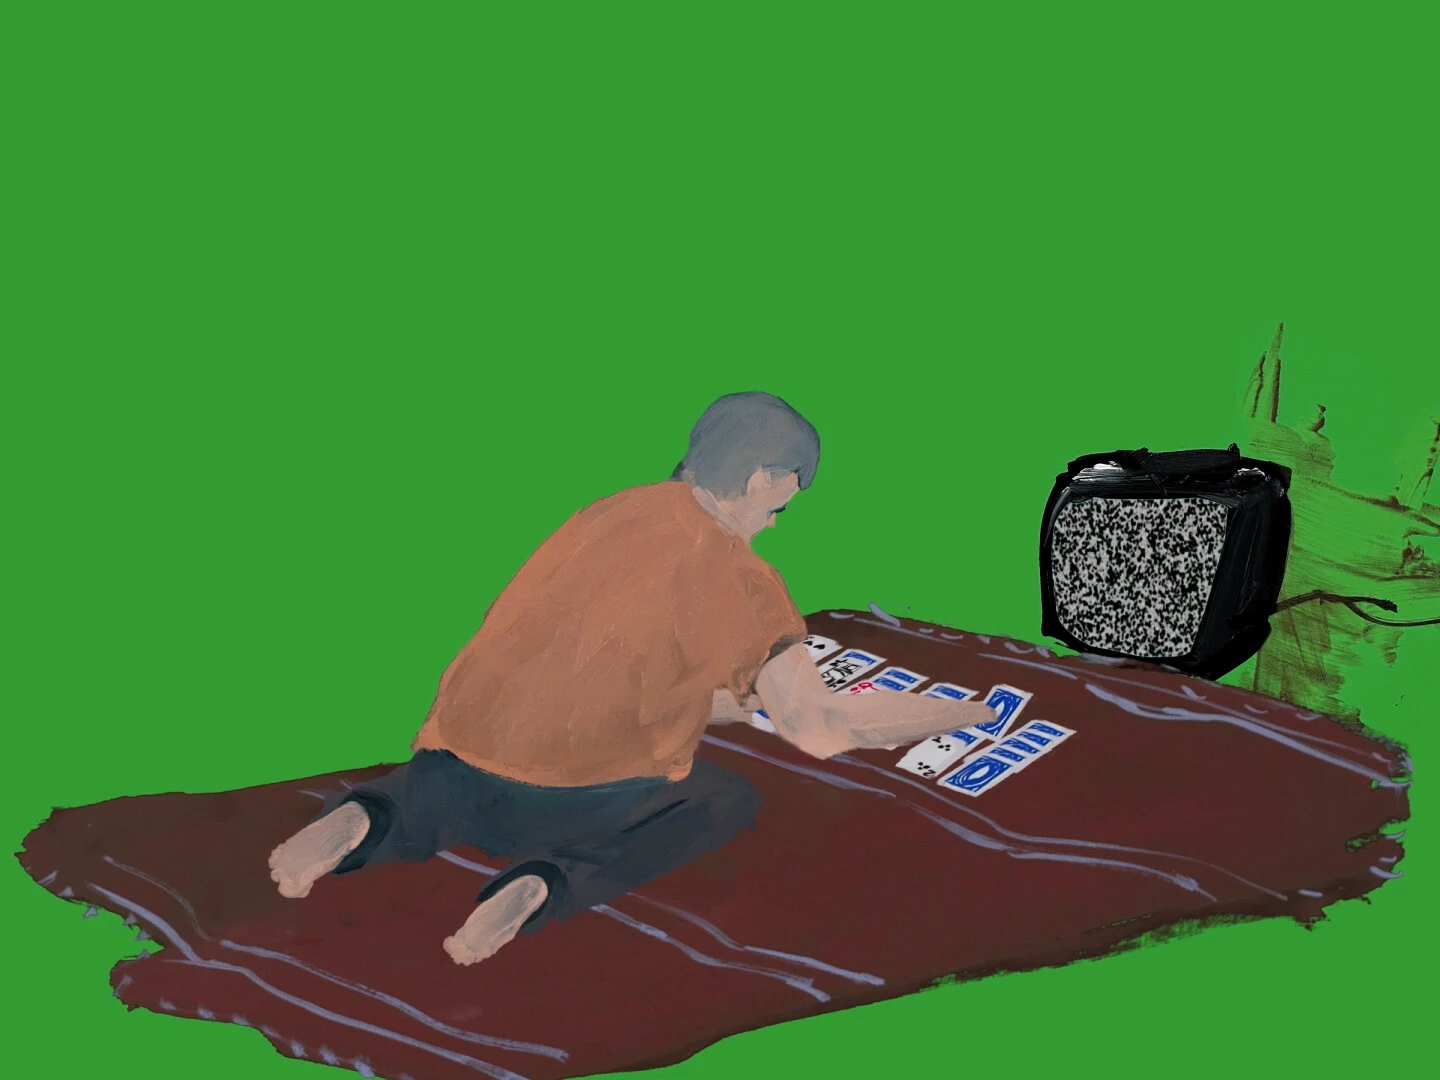 Against a flat green background a person plays solitaire on a brown blanket in front of a tv displaying static